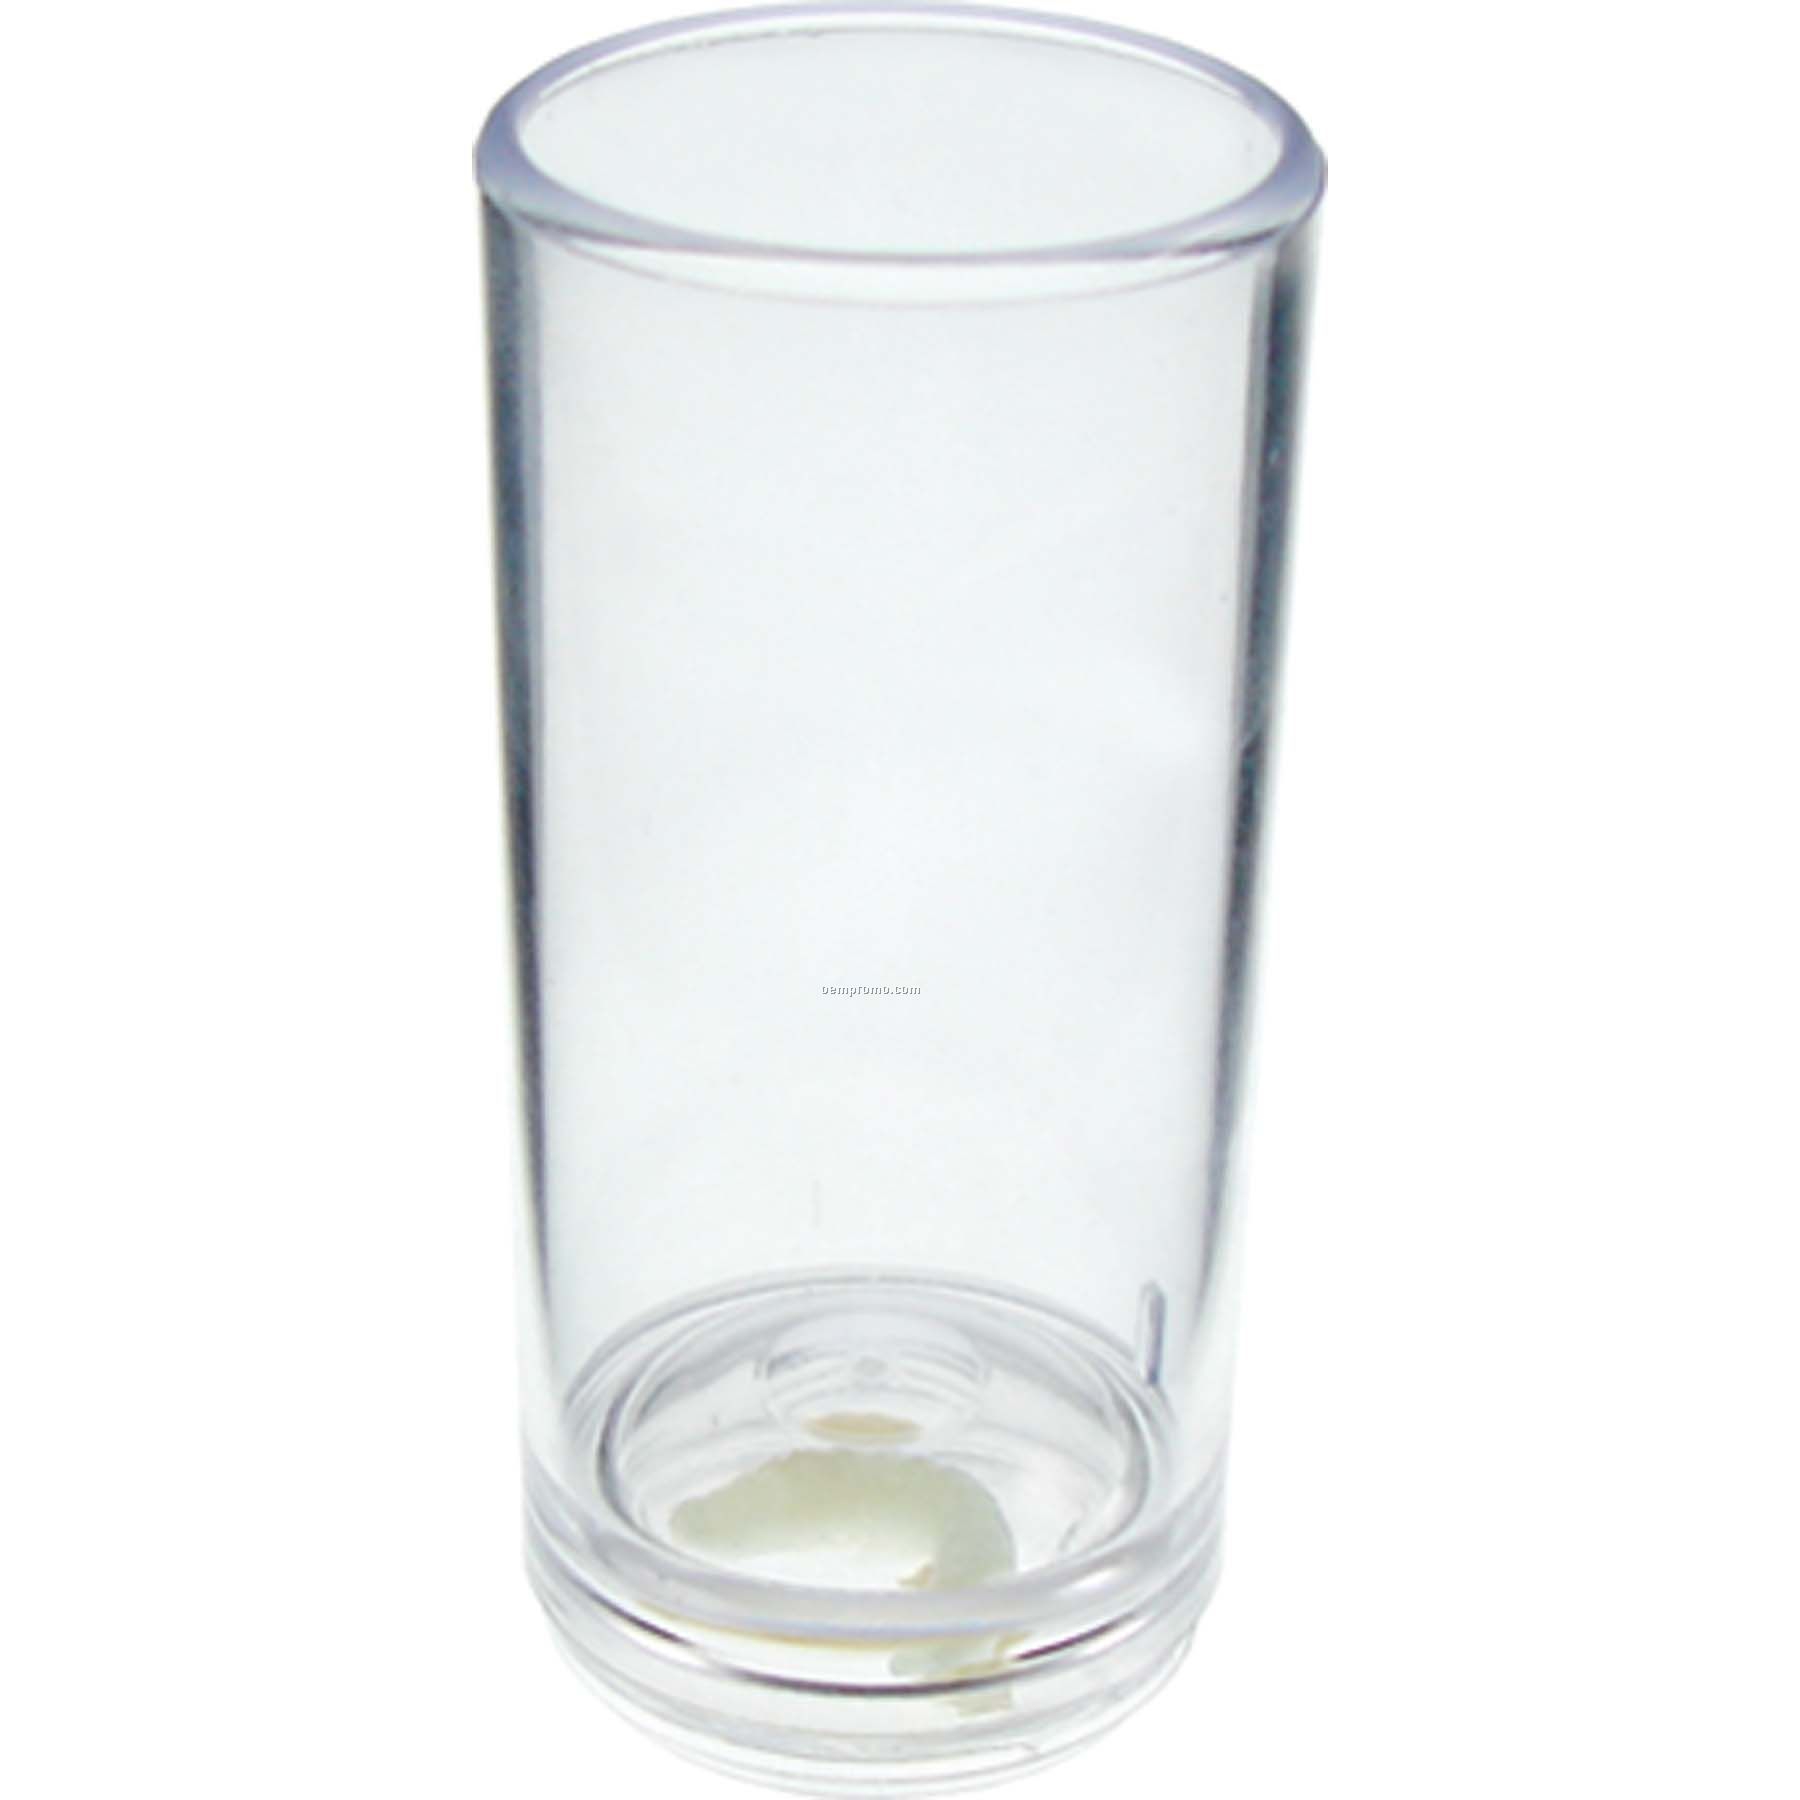 1.5 Oz. Tequila Compartment Shooter Glass